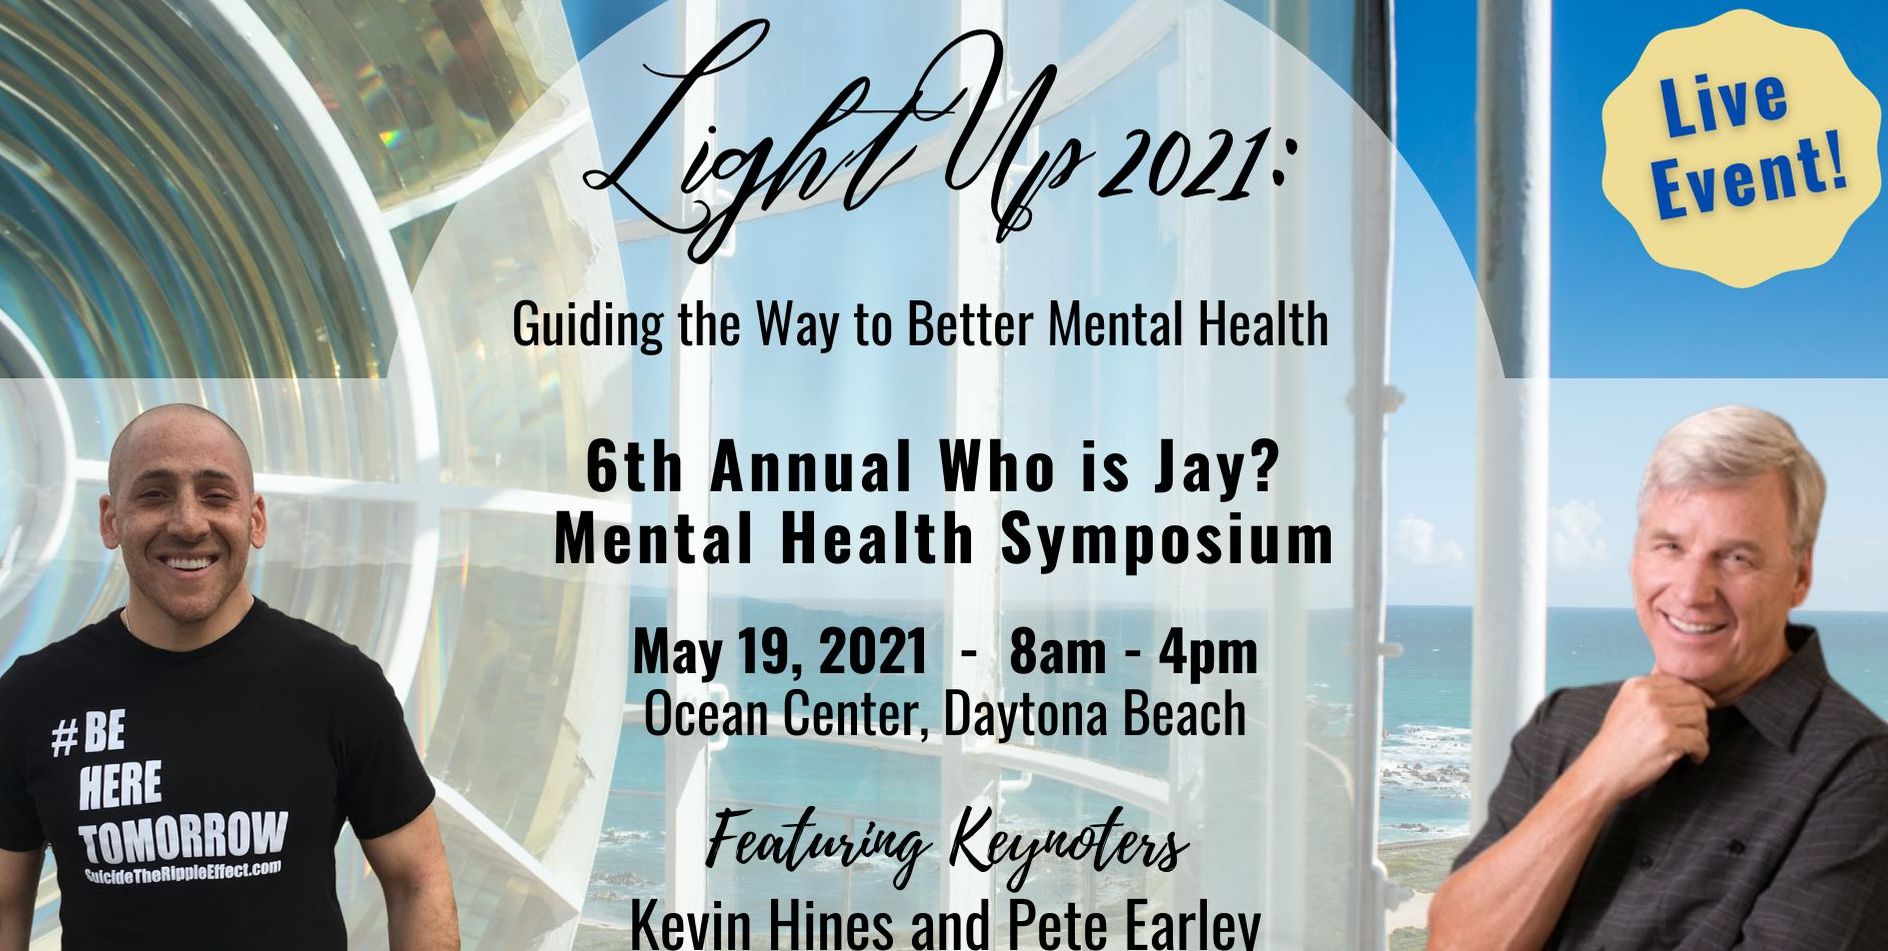 6th Annual Who is Jay? Mental Health Symposium